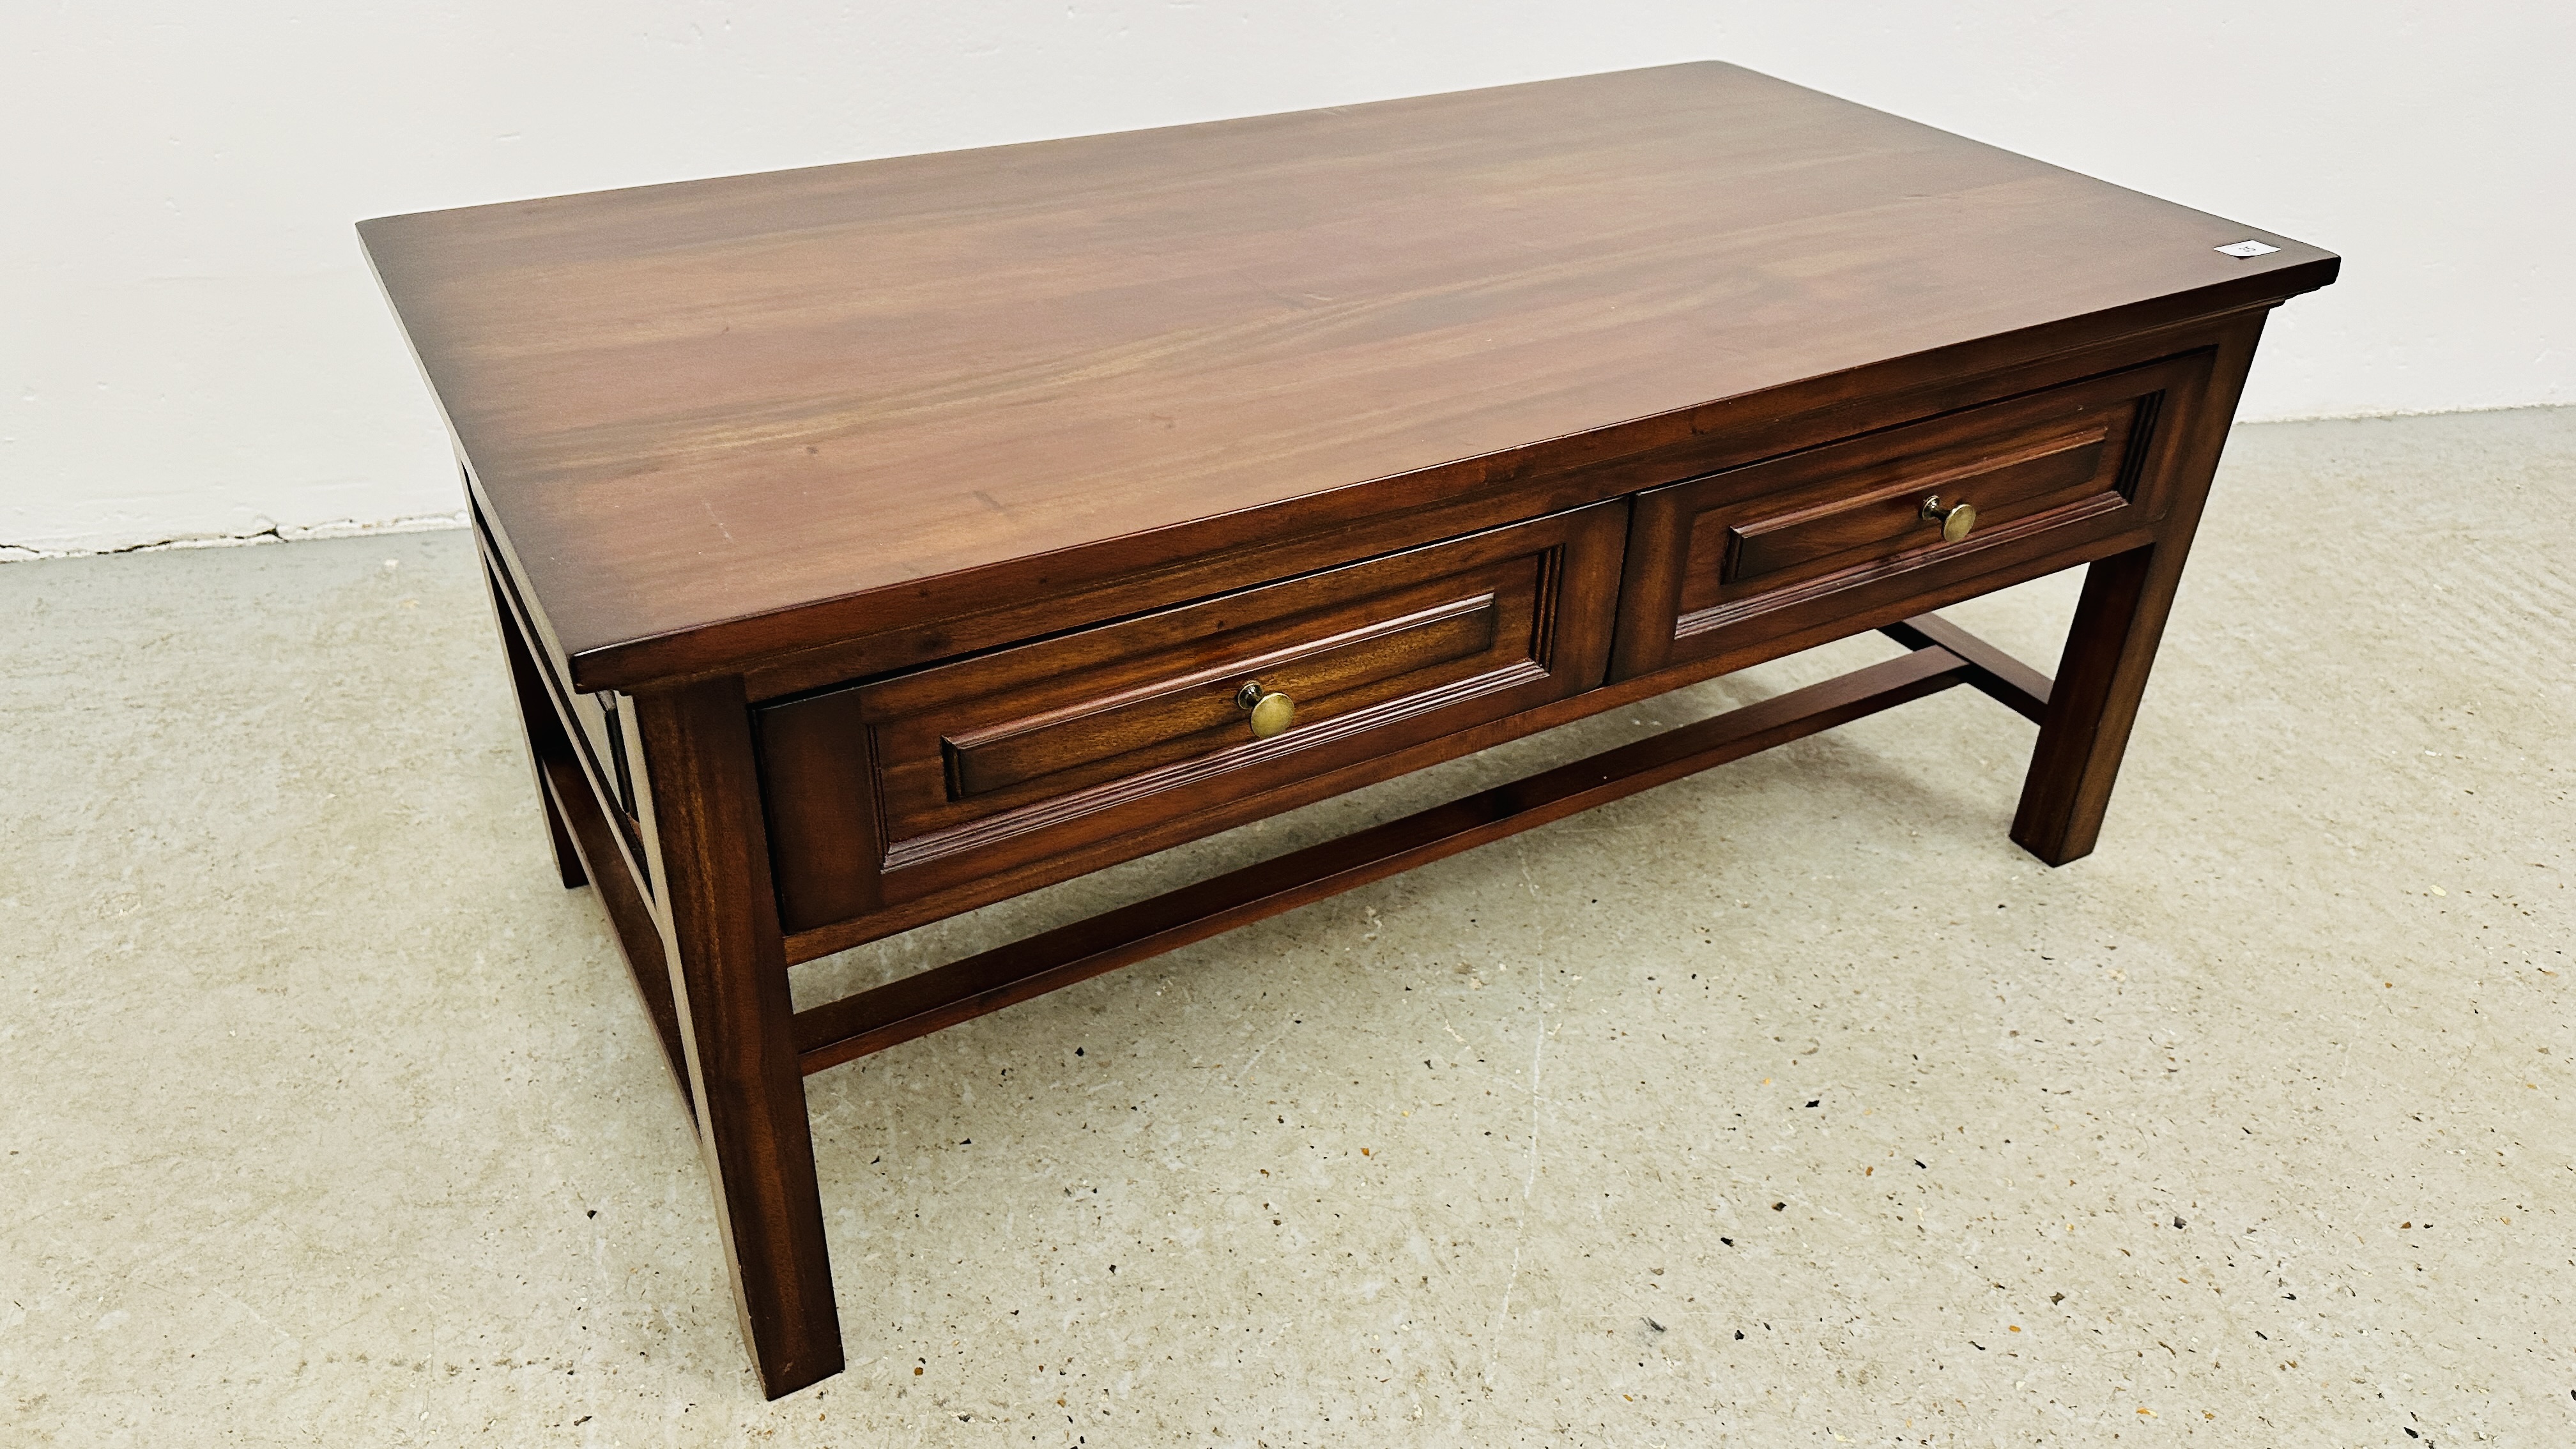 A DARK WOOD TWO DRAWER RECTANGULAR COFFEE TABLE - 110CM X 60CM. - Image 3 of 9